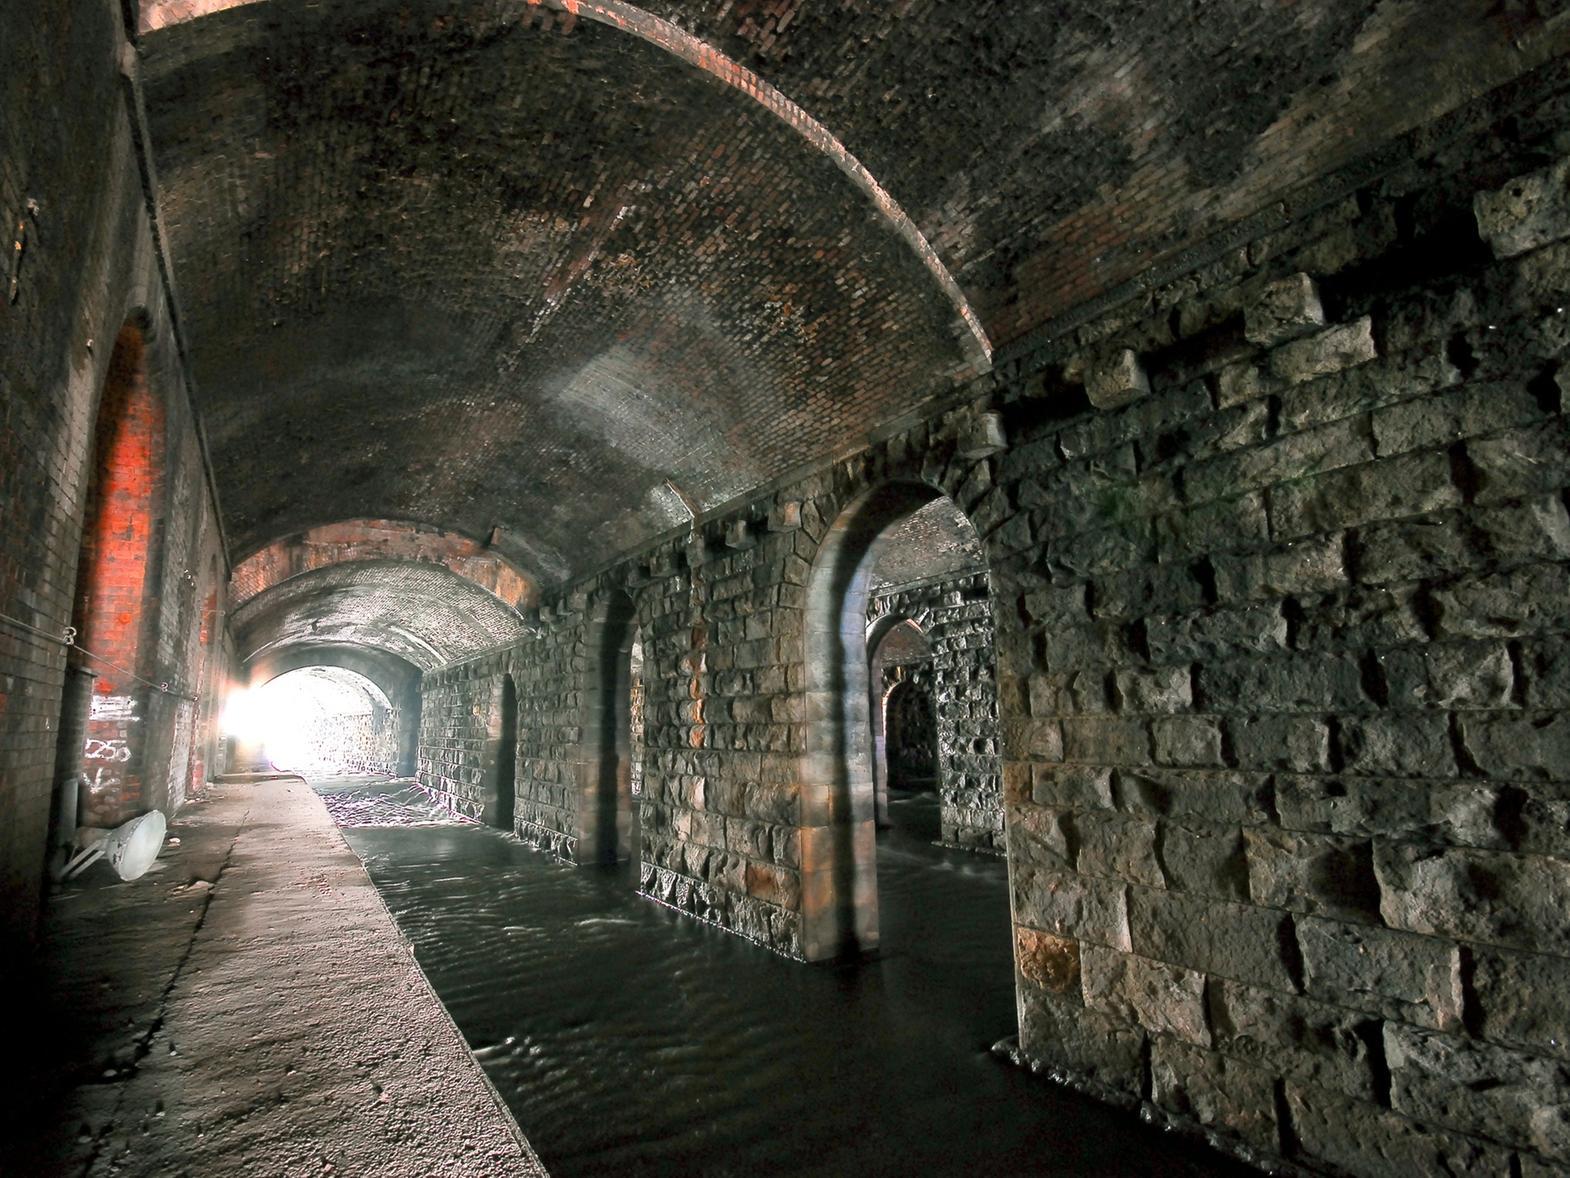 This is the first of a series of photos featured in this gallery of unseen views under the Dark Arches.